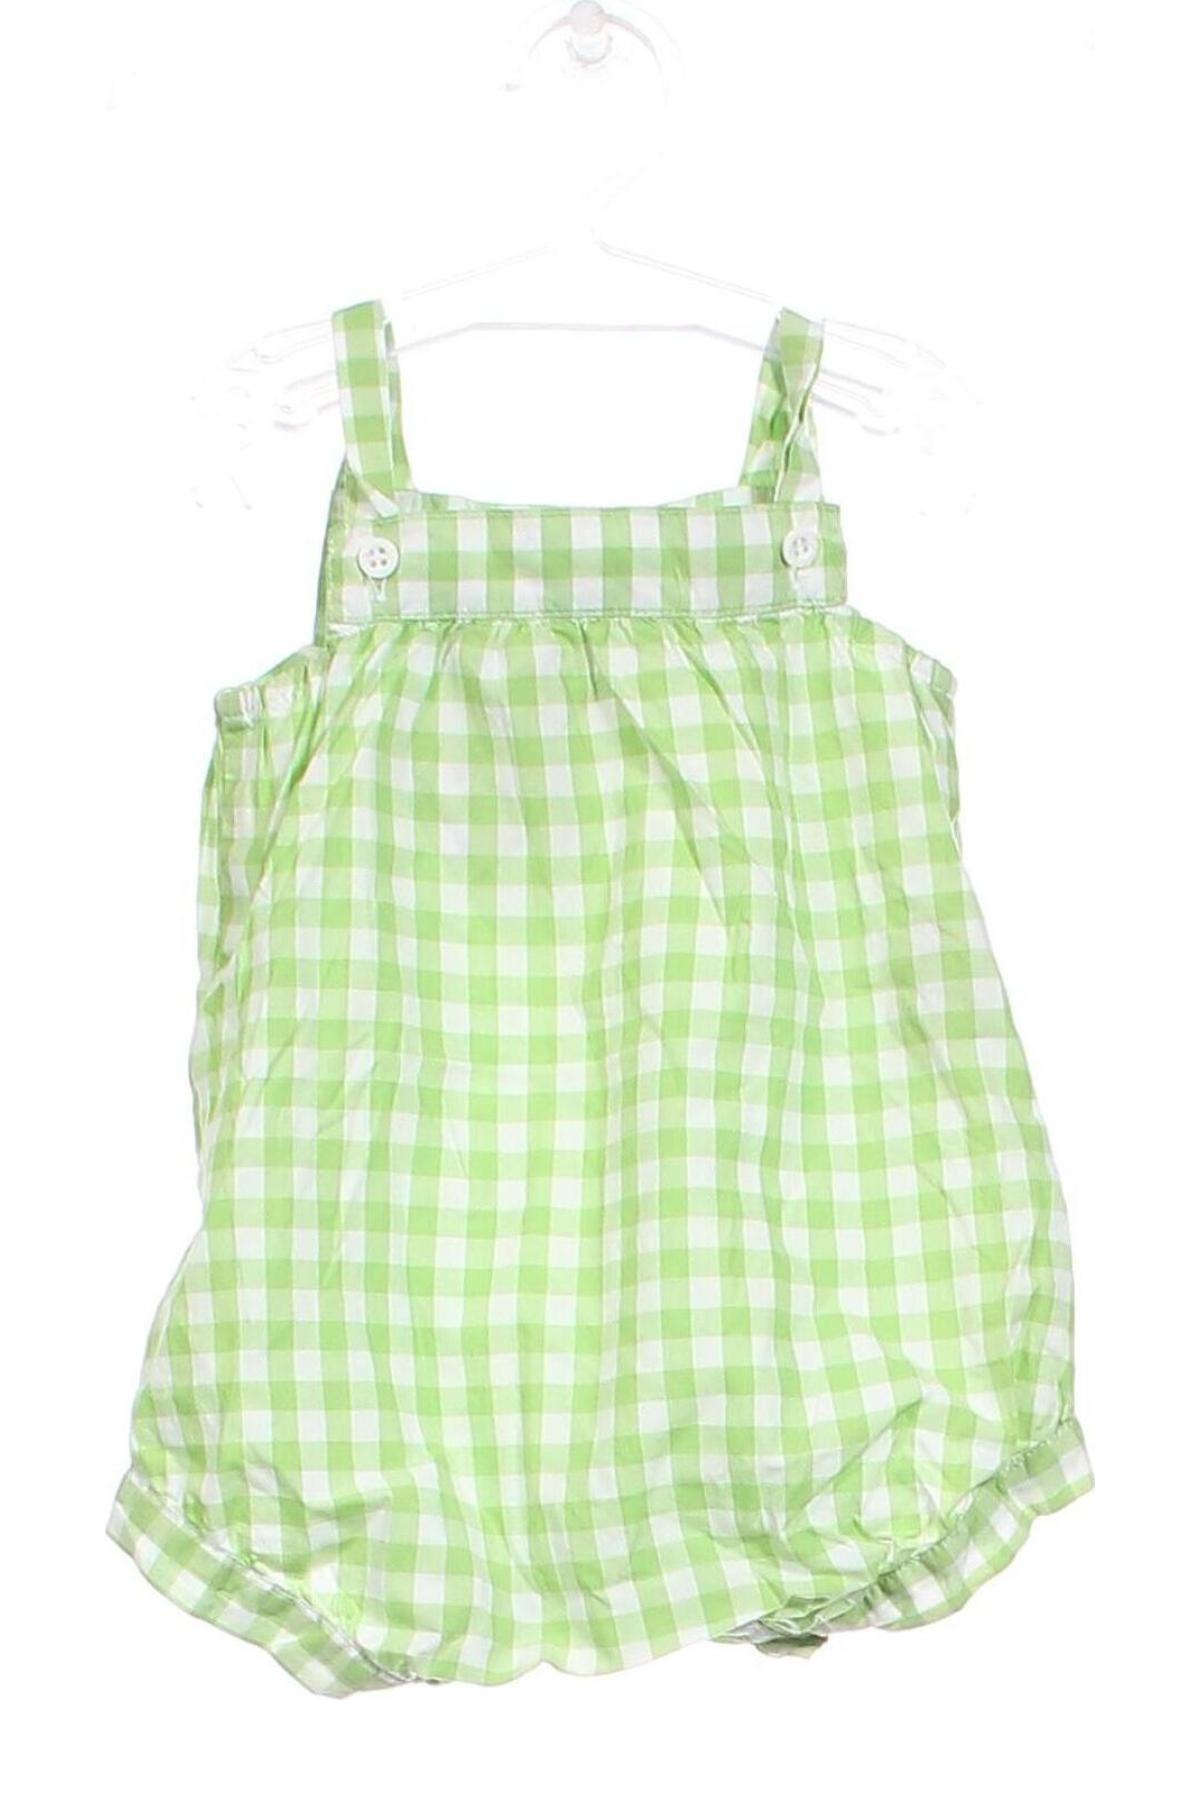 Kinder Overall United Colors Of Benetton, Größe 3-6m/ 62-68 cm, Farbe Mehrfarbig, Preis € 11,36